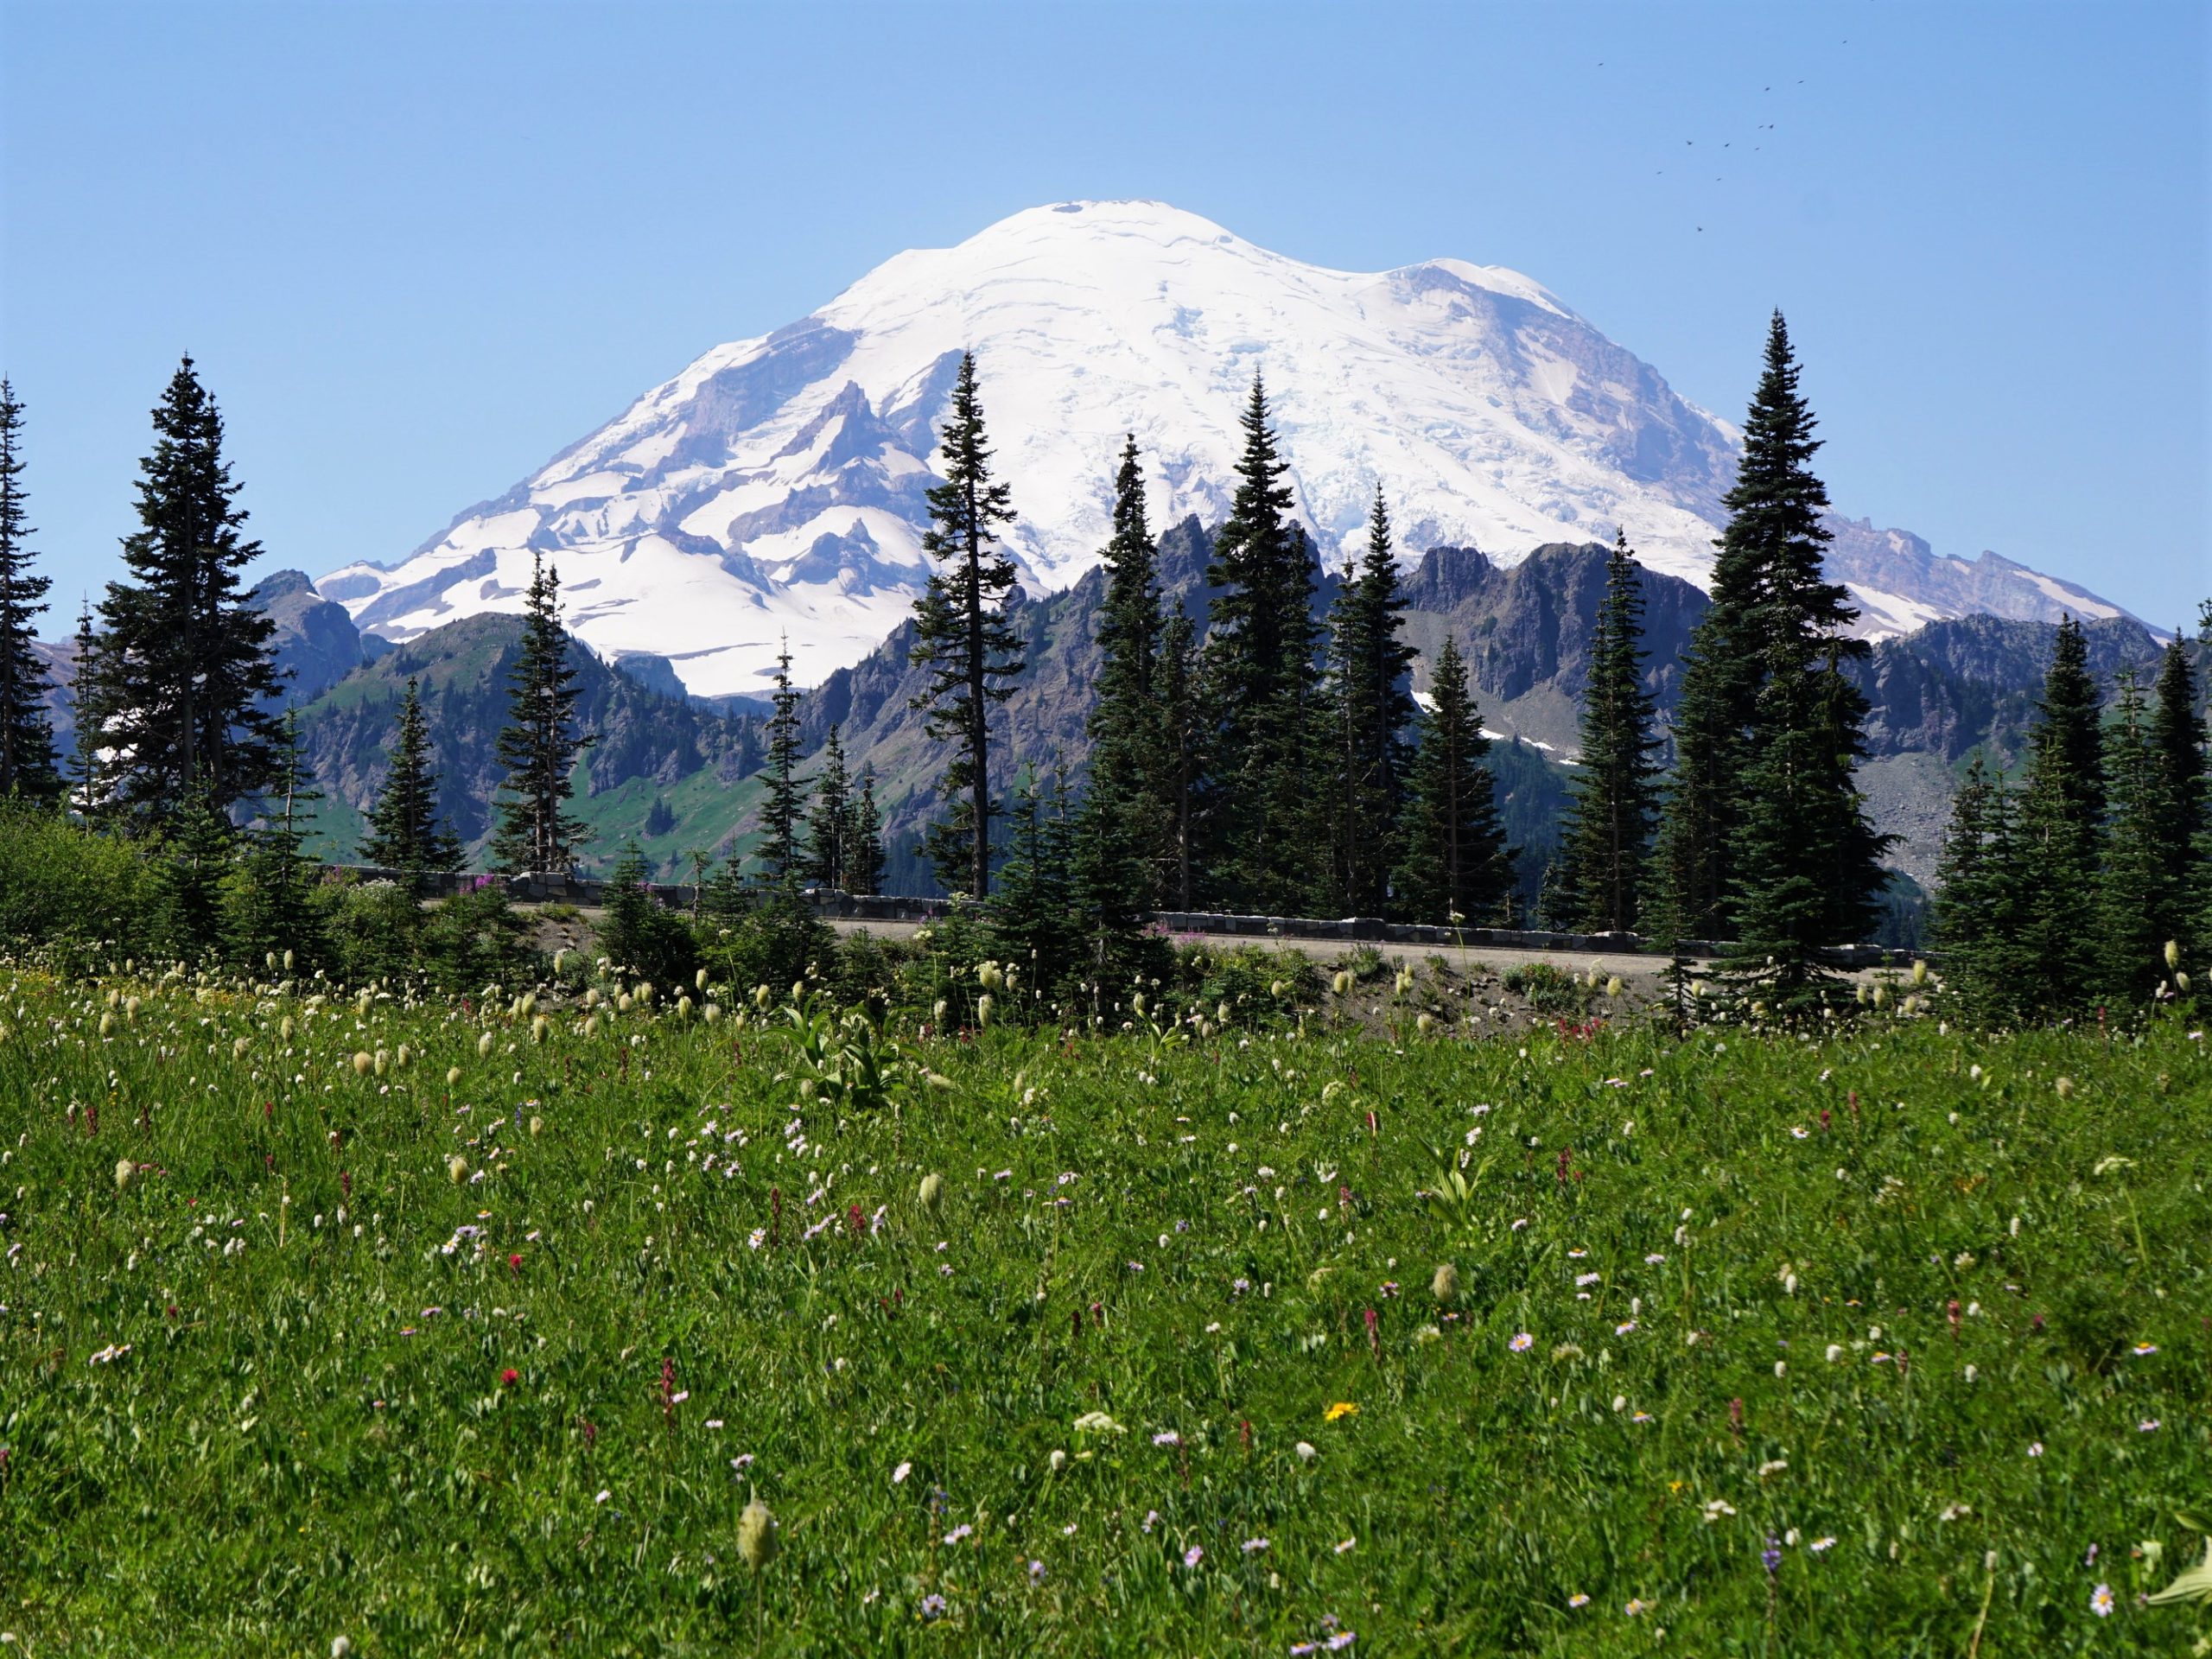 The meadows around Tipsoo Lake are filled with wildflowers and offer views of Mount Rainier. Photo courtesy of the U.S. National Park Service